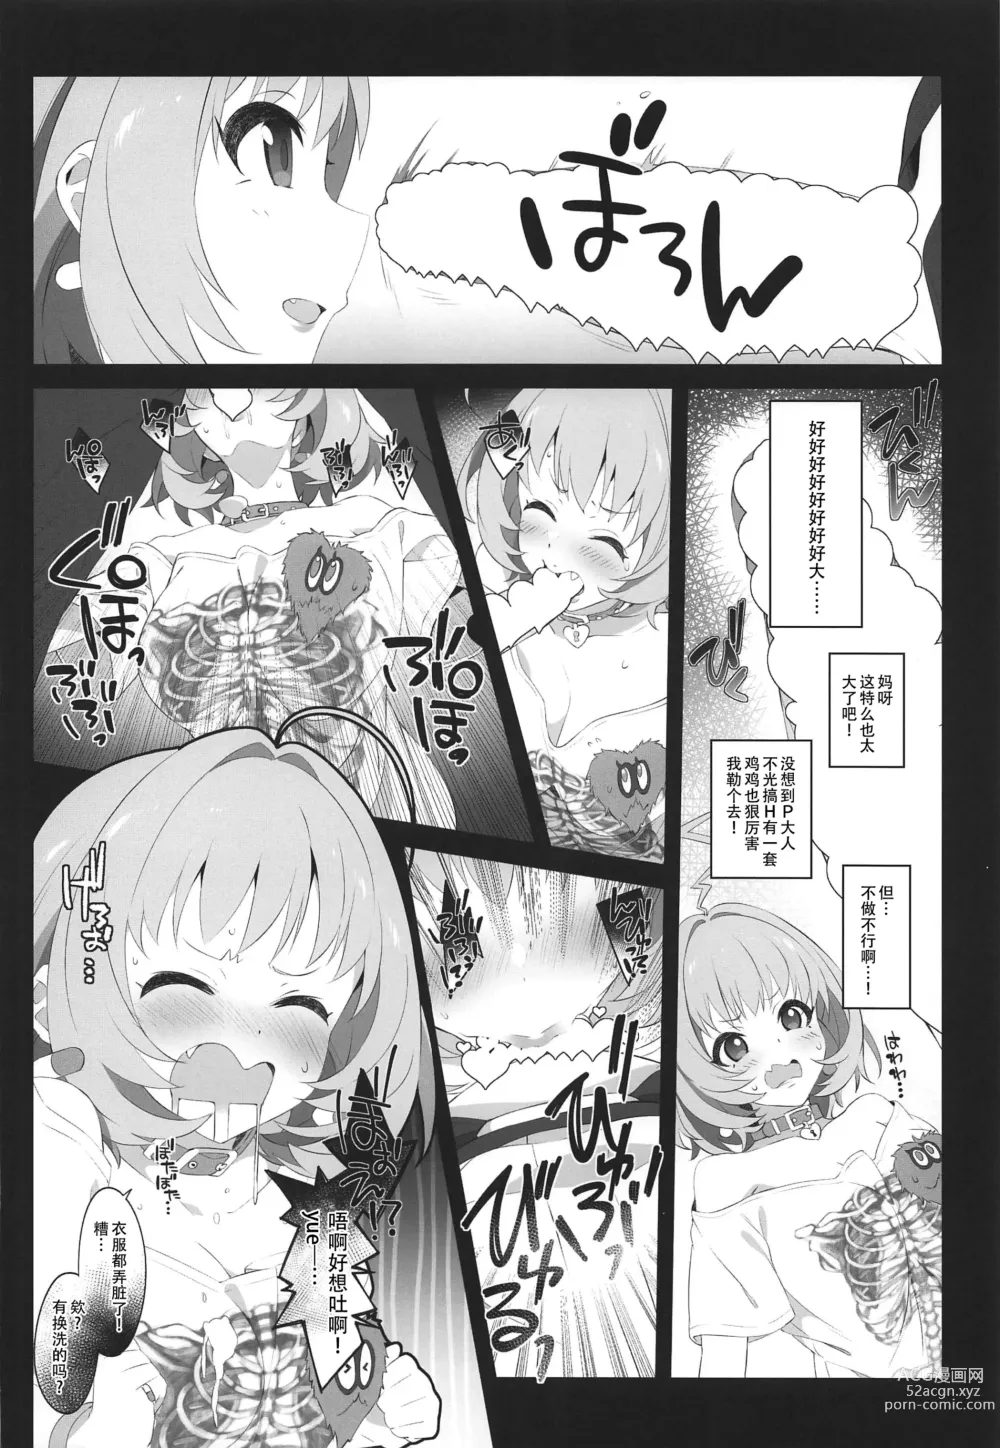 Page 24 of doujinshi Three stars have a dream with sparkles.